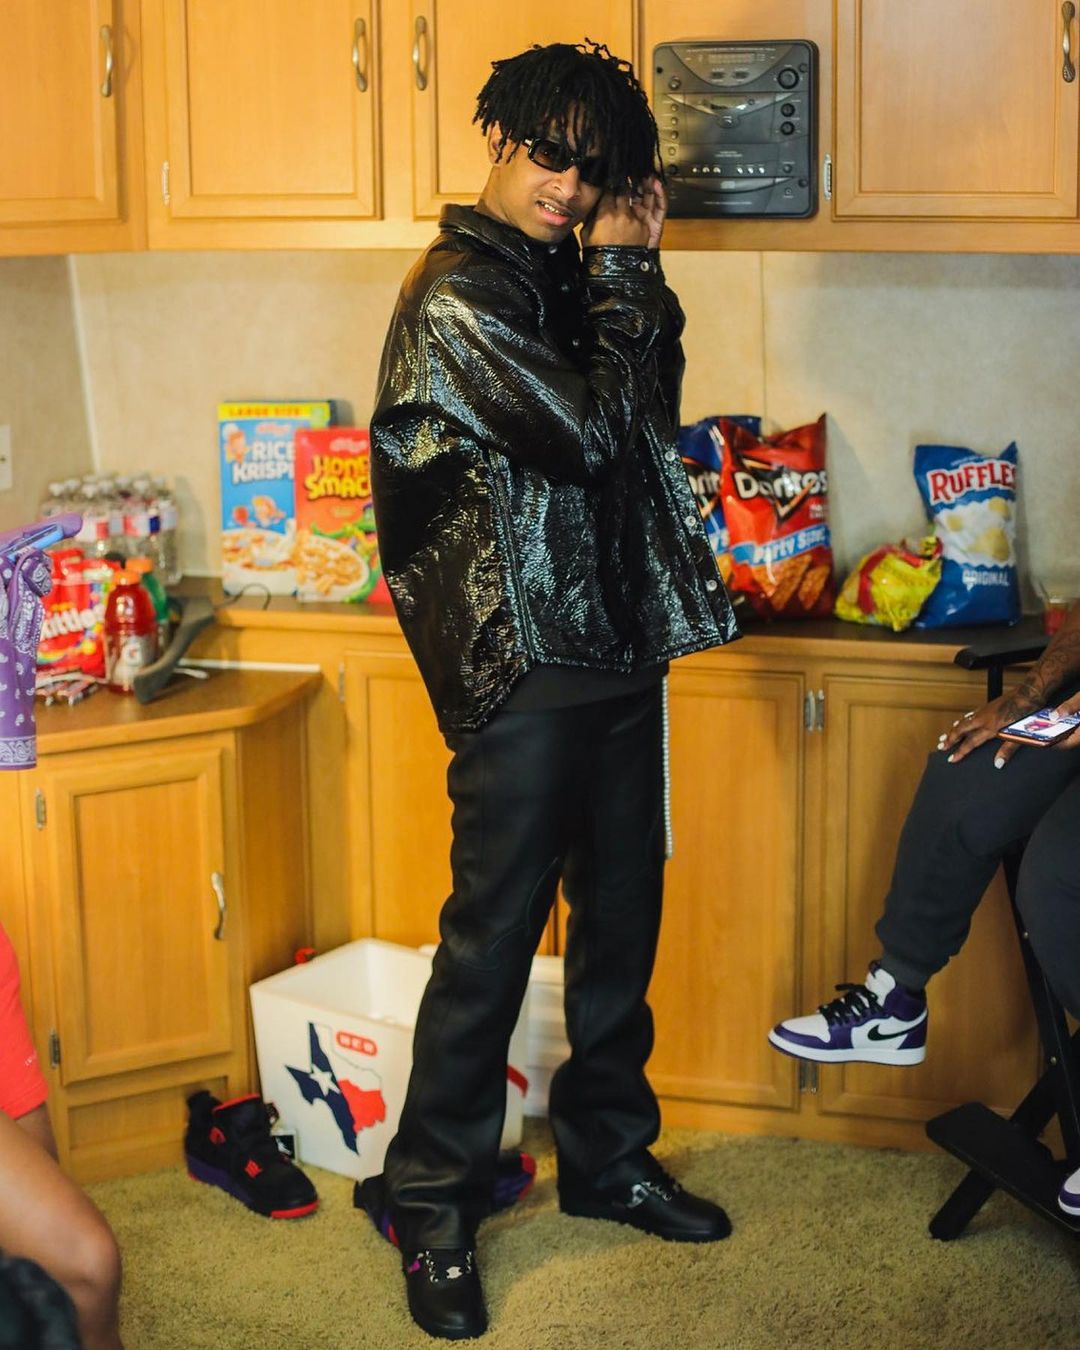 21 Savage Wearing An All Black Chrome Hearts, Louis Vuitton, & Rick Owens 'Fit